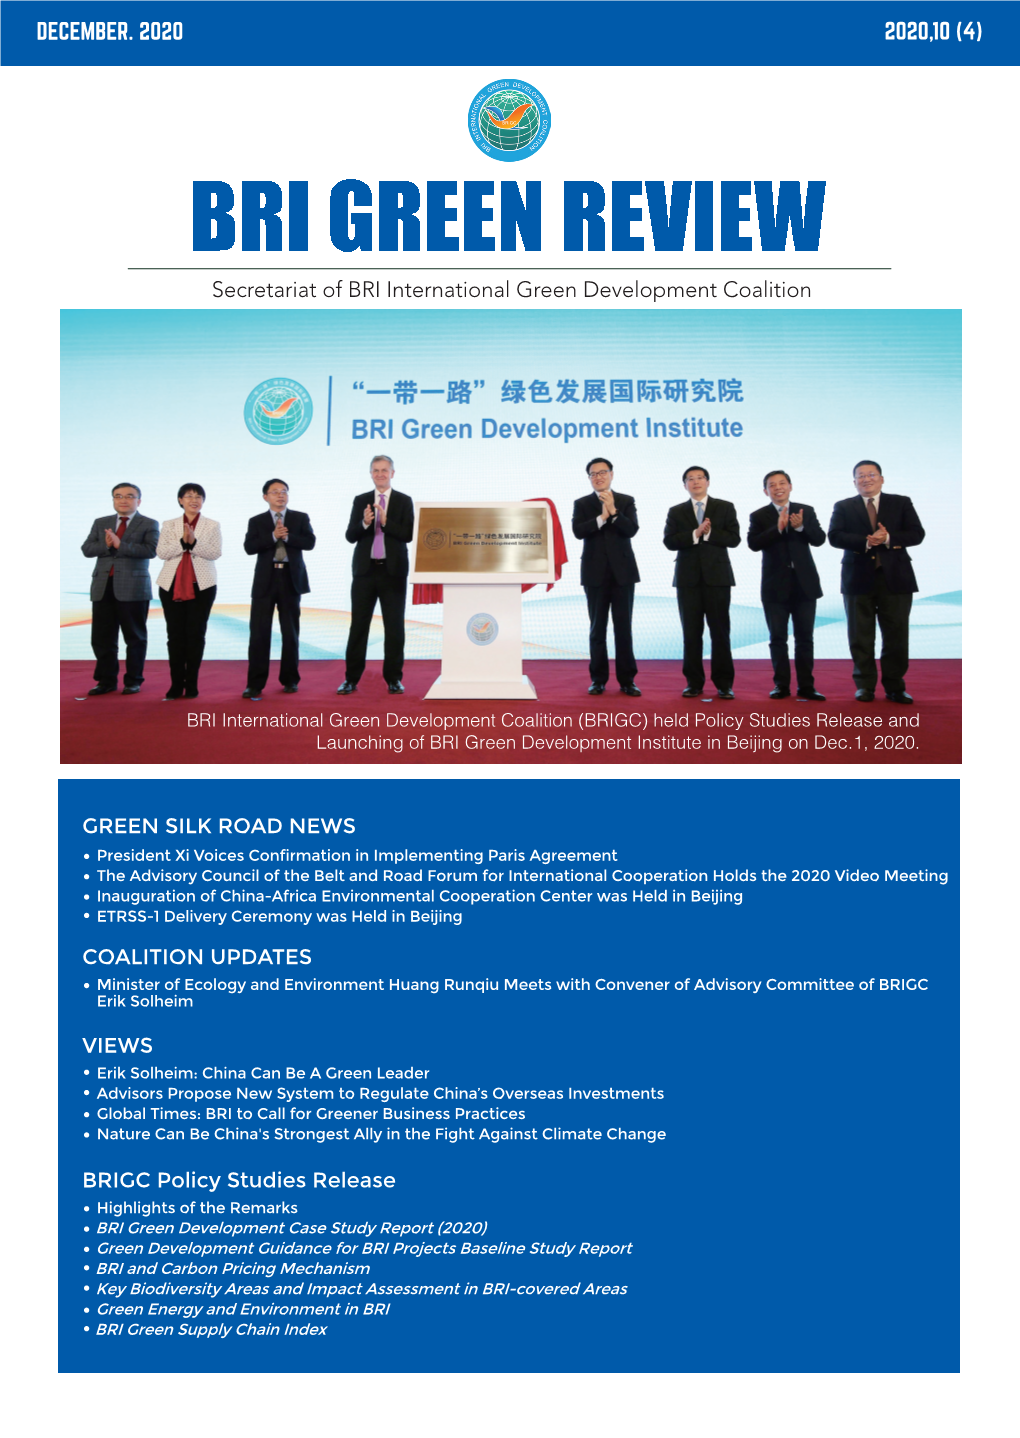 BRI Green Review-2020 Issue4 2021-04-26